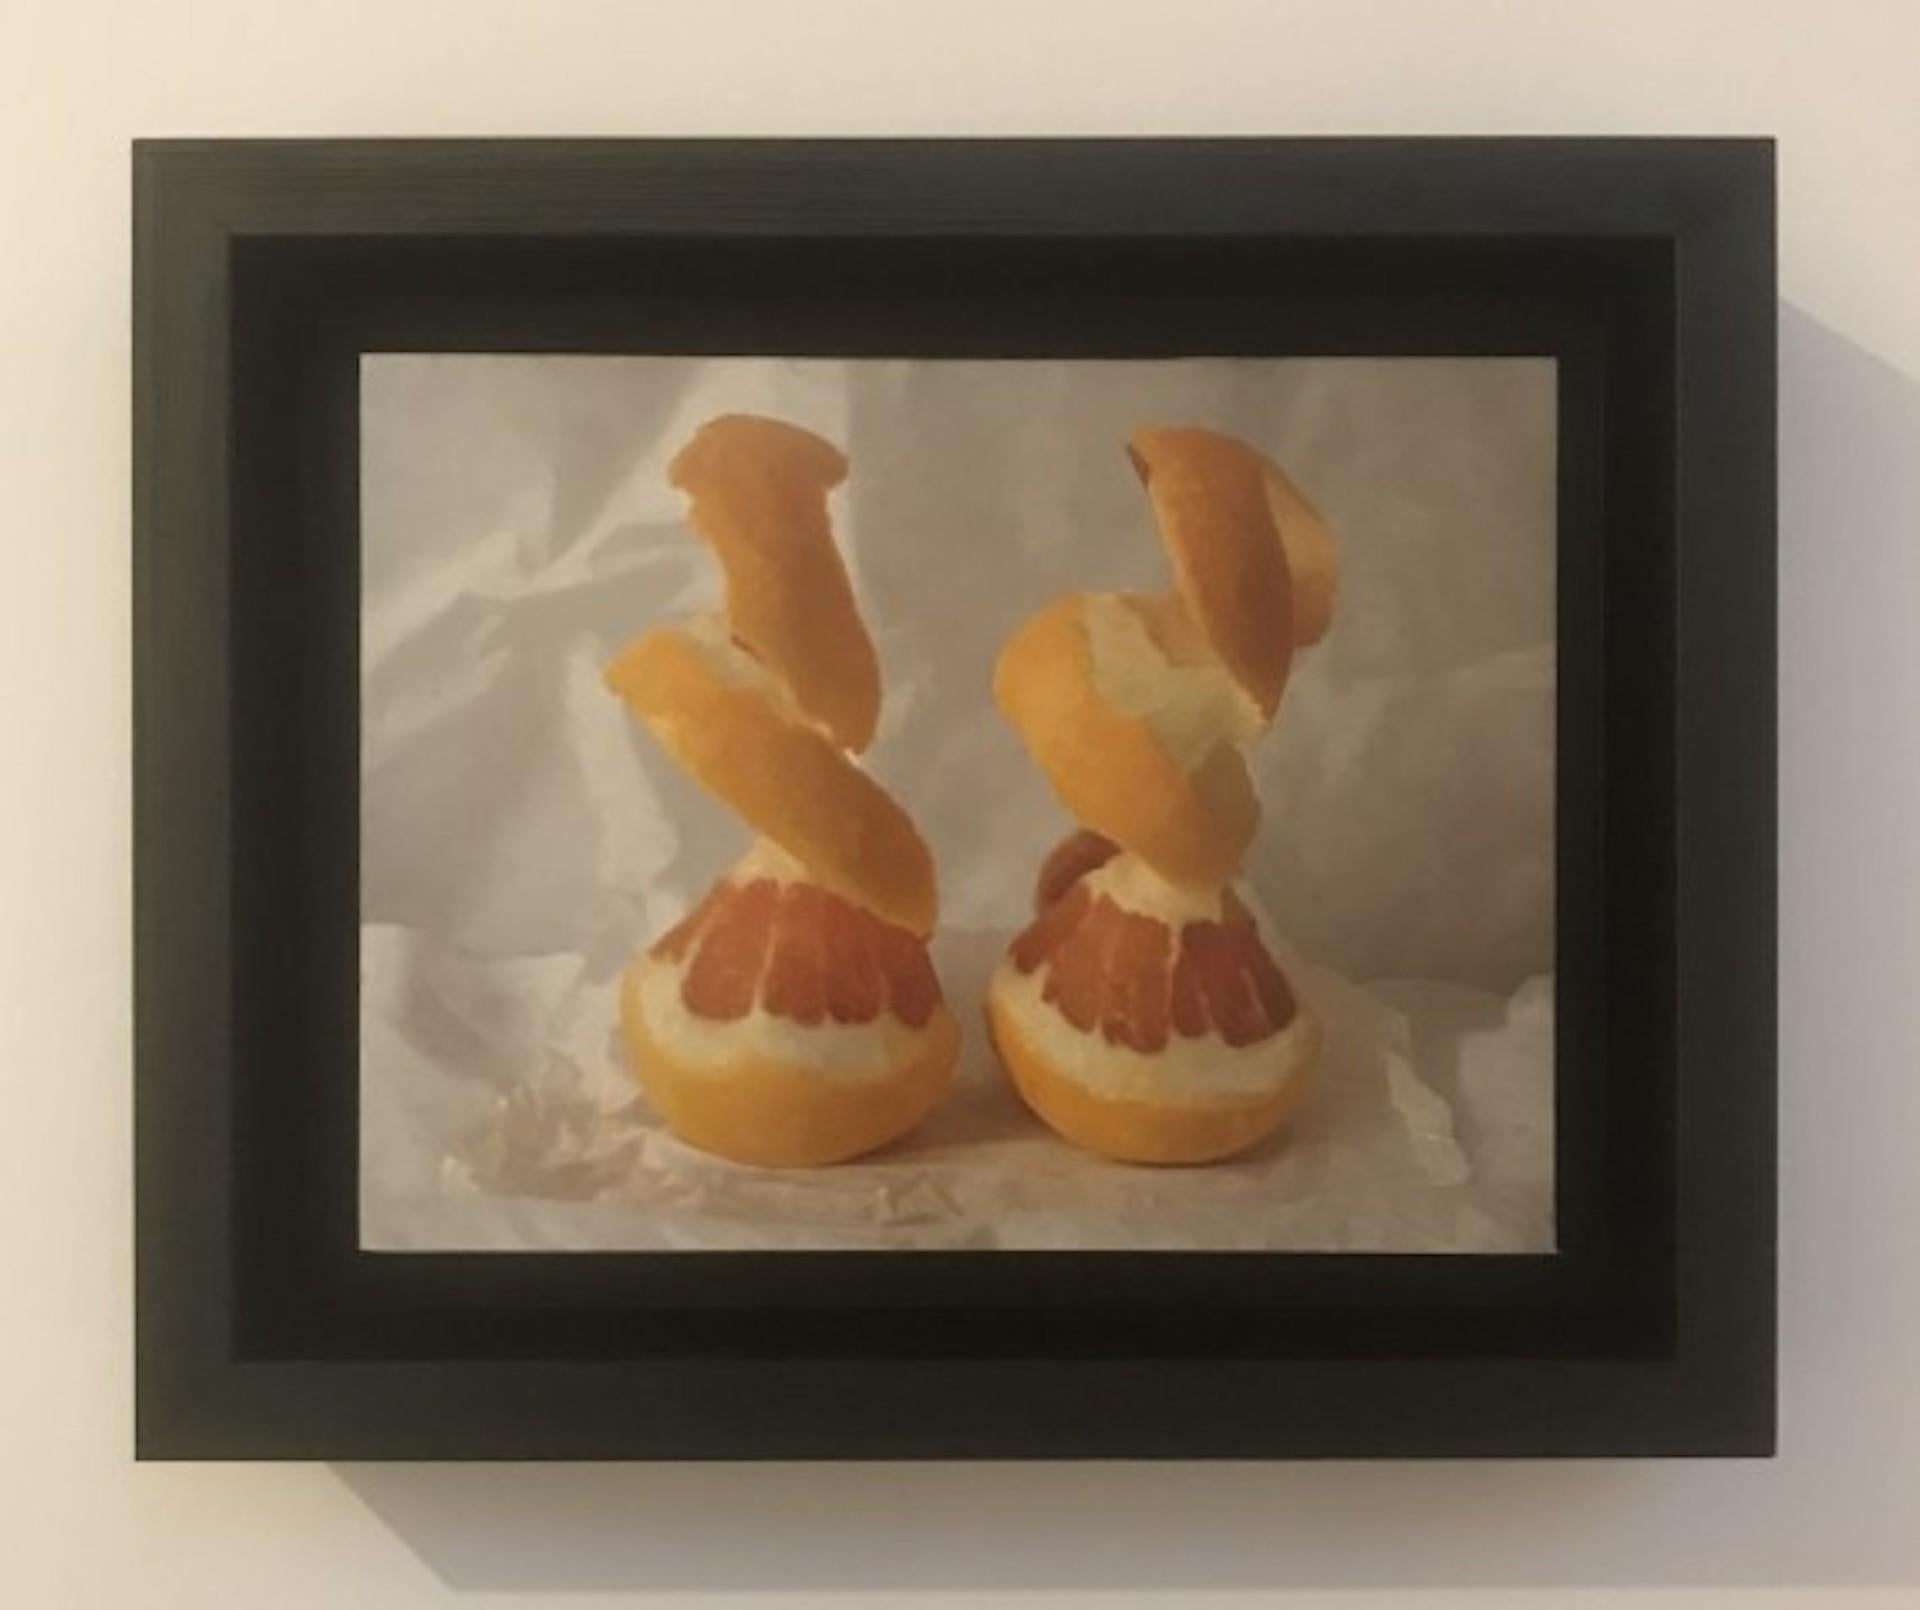 Kate Verrion, Two Peeled Oranges, Affordable Art, Original Still Life Painting 1